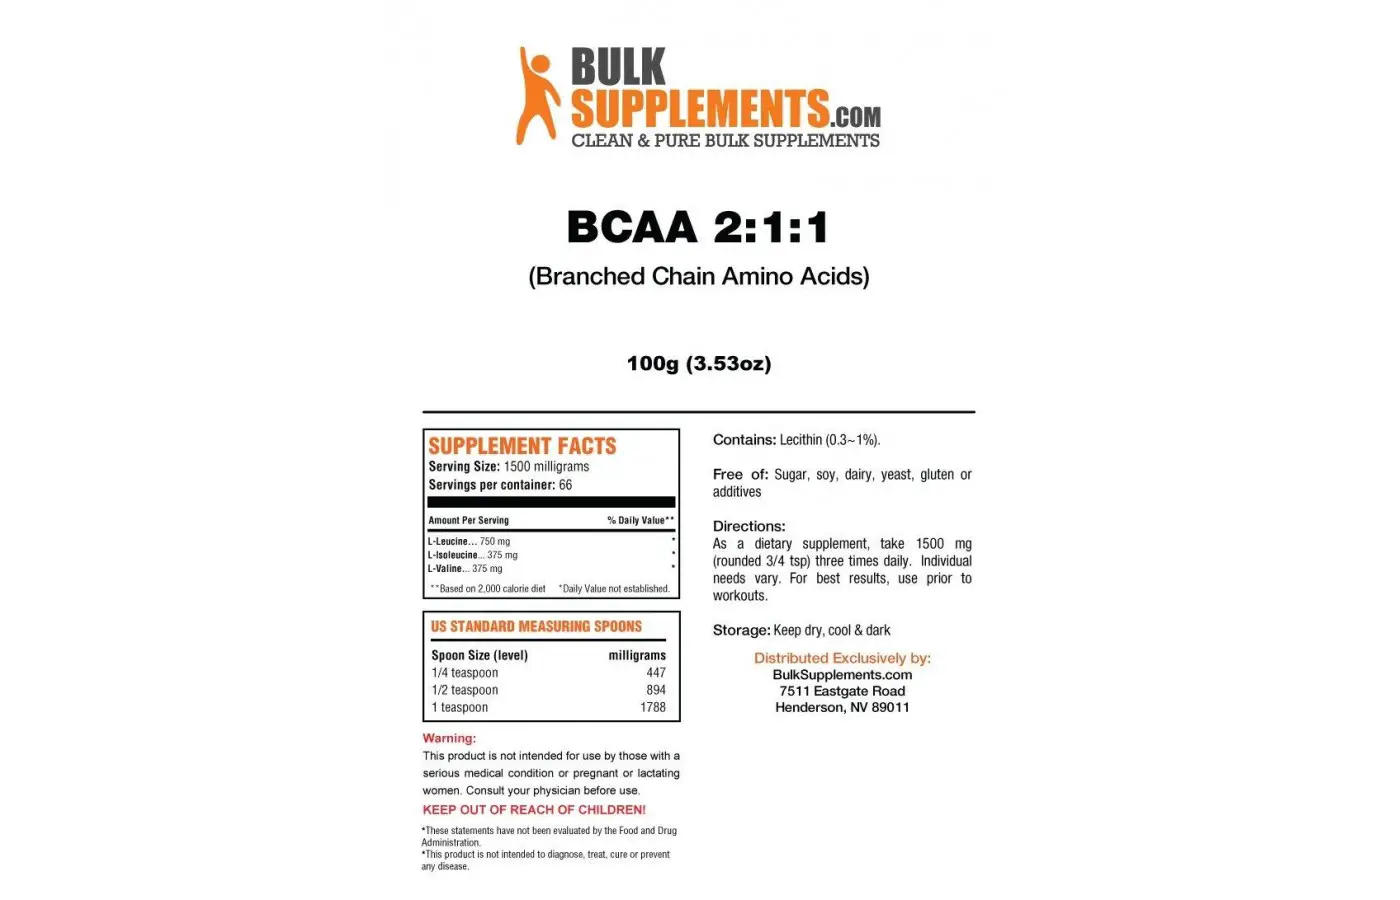 BCAA Sup Facts